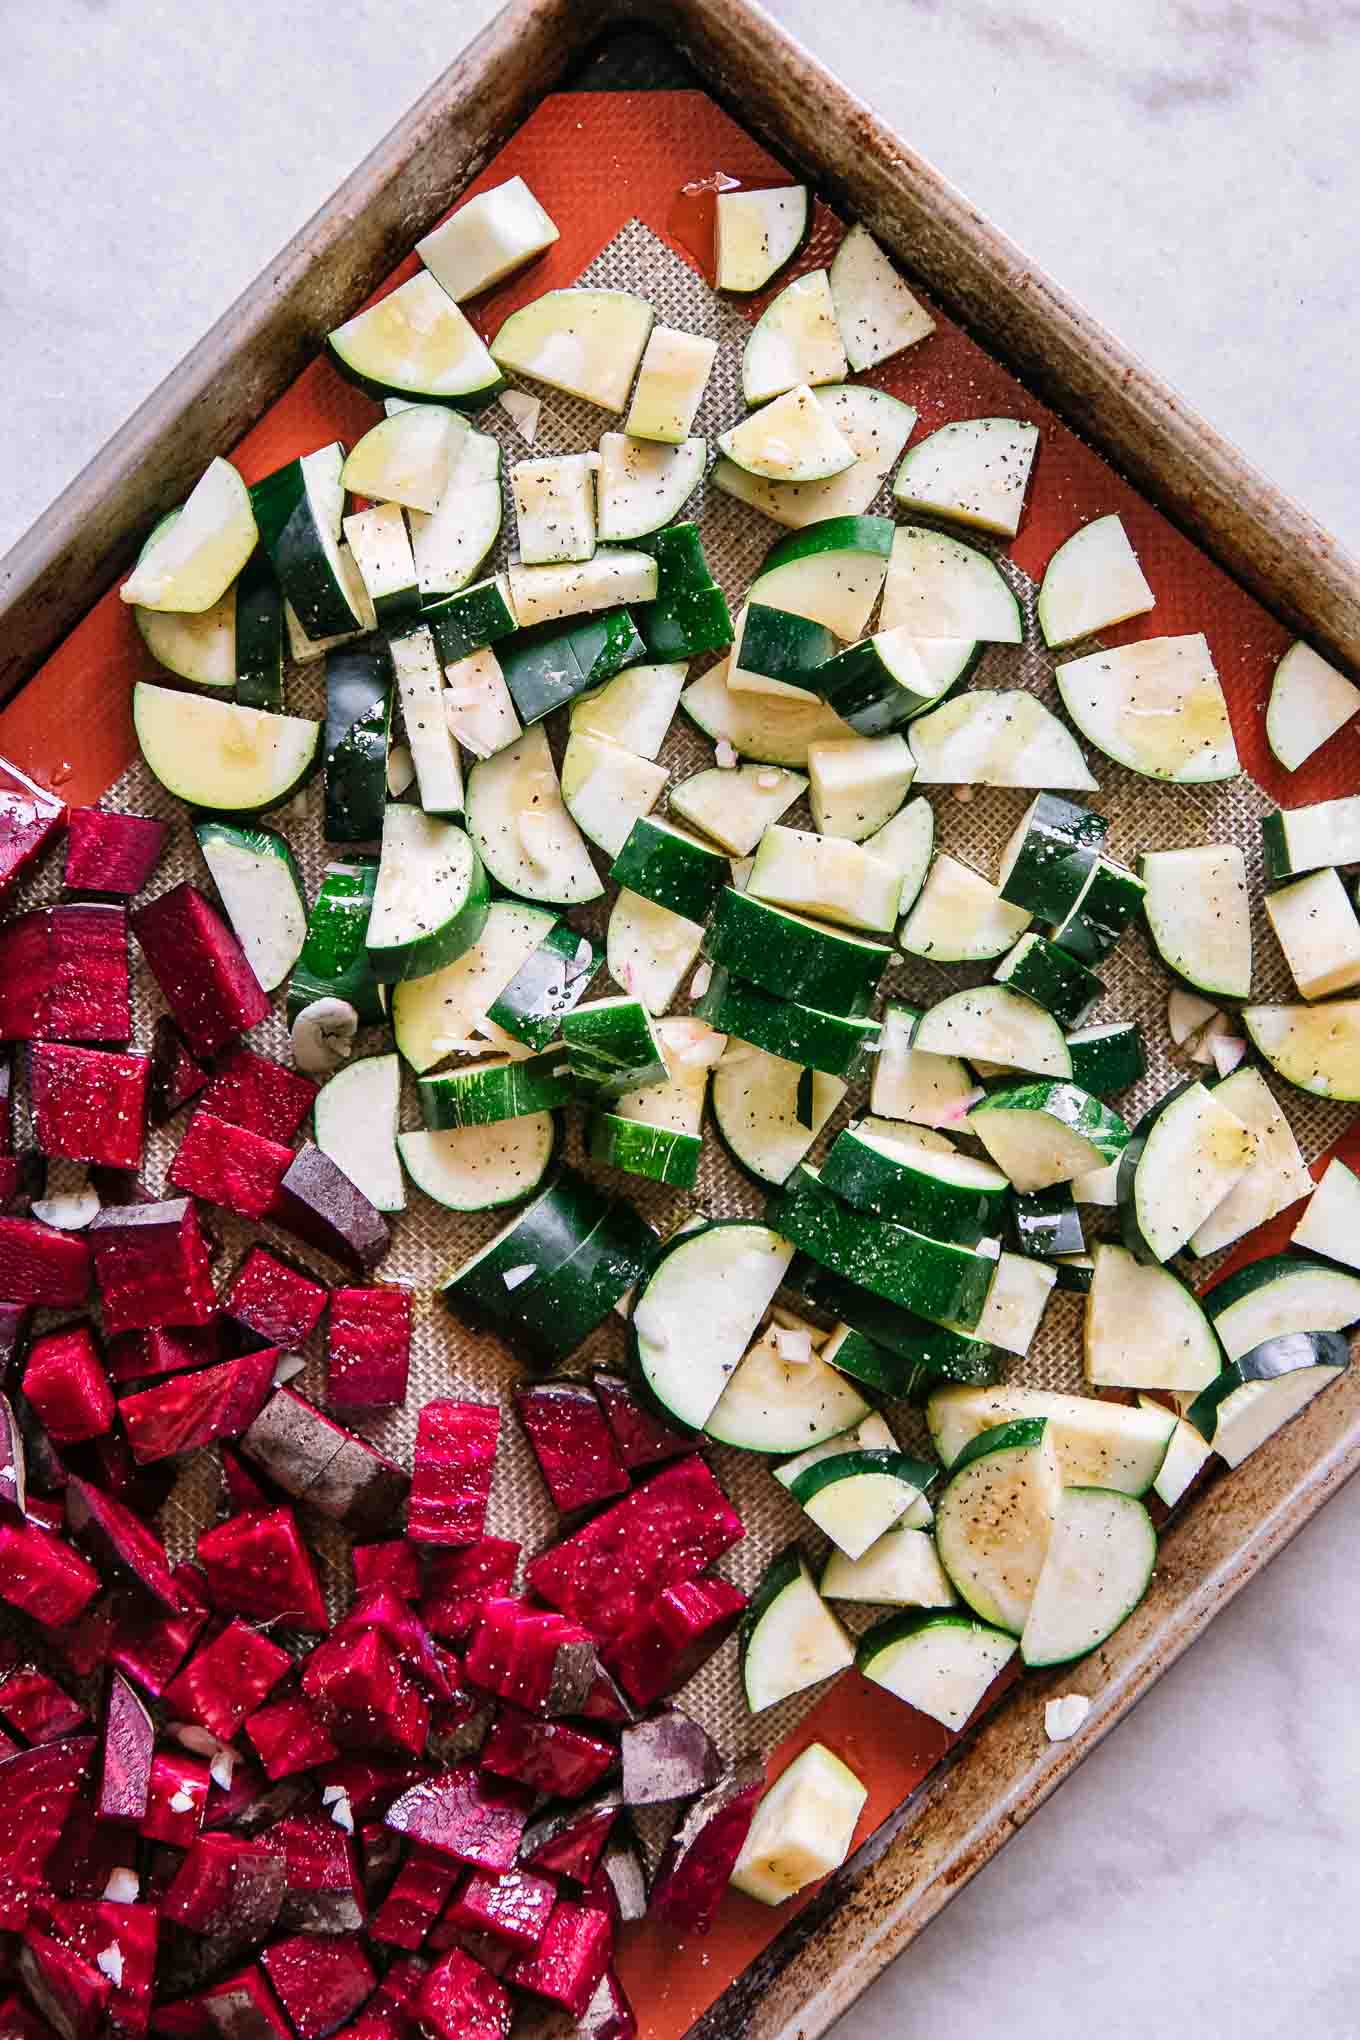 sliced and seasoned beets and zucchini on a baking sheet before roasting